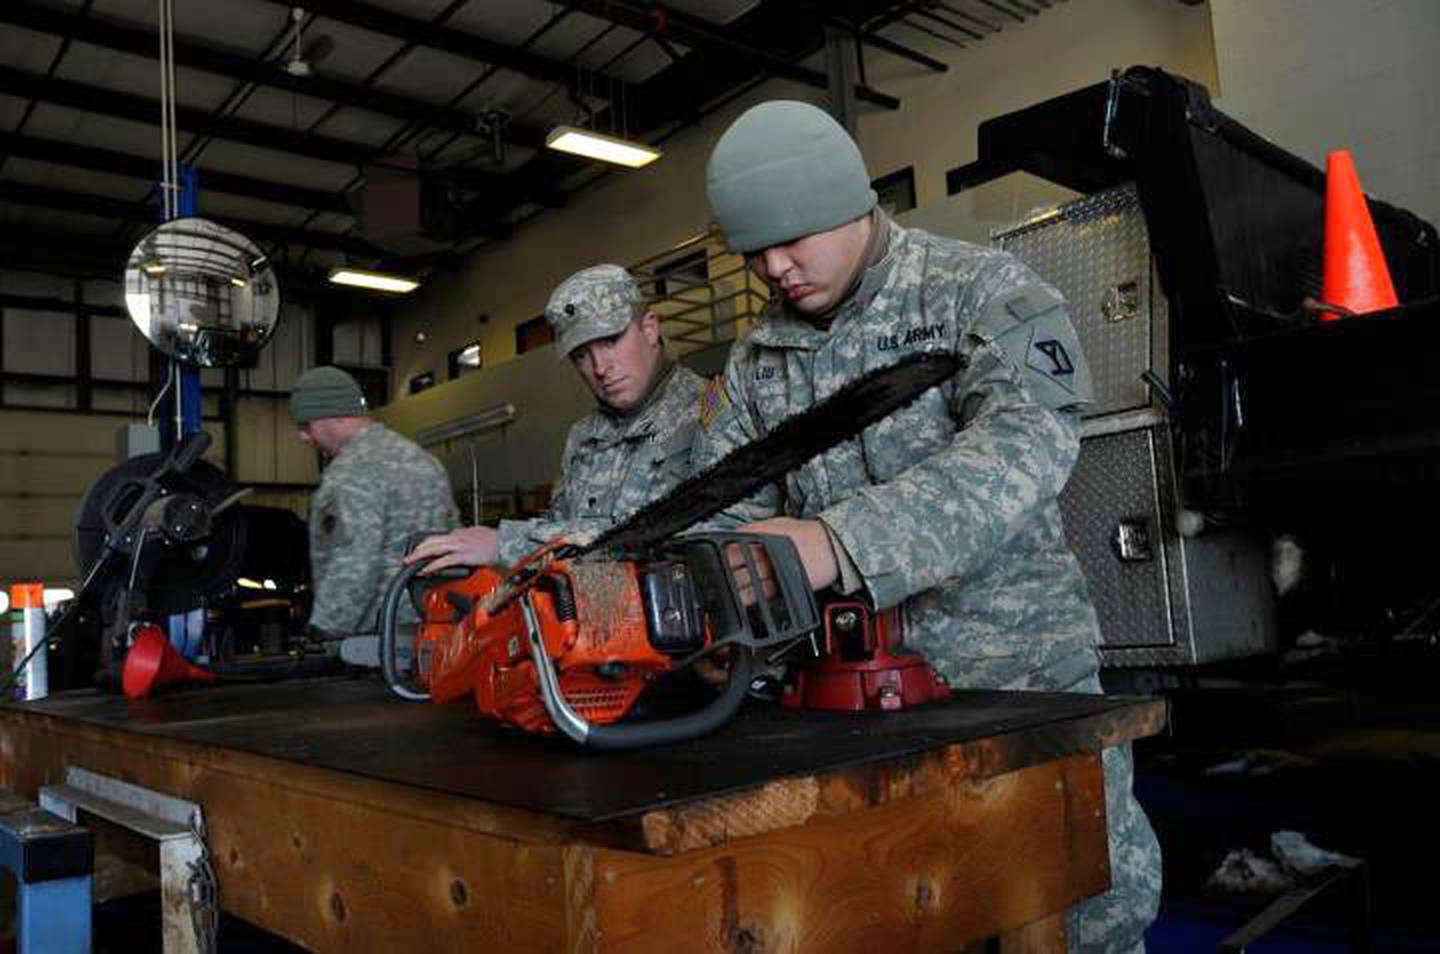 Army Spcs. Chris DeLano, center, and David Liu, right, perform maintenance on chainsaws used to cut fallen trees and clear roads after winter storm Nemo in Plymouth, Massachusetts, Feb. 10, 2013.